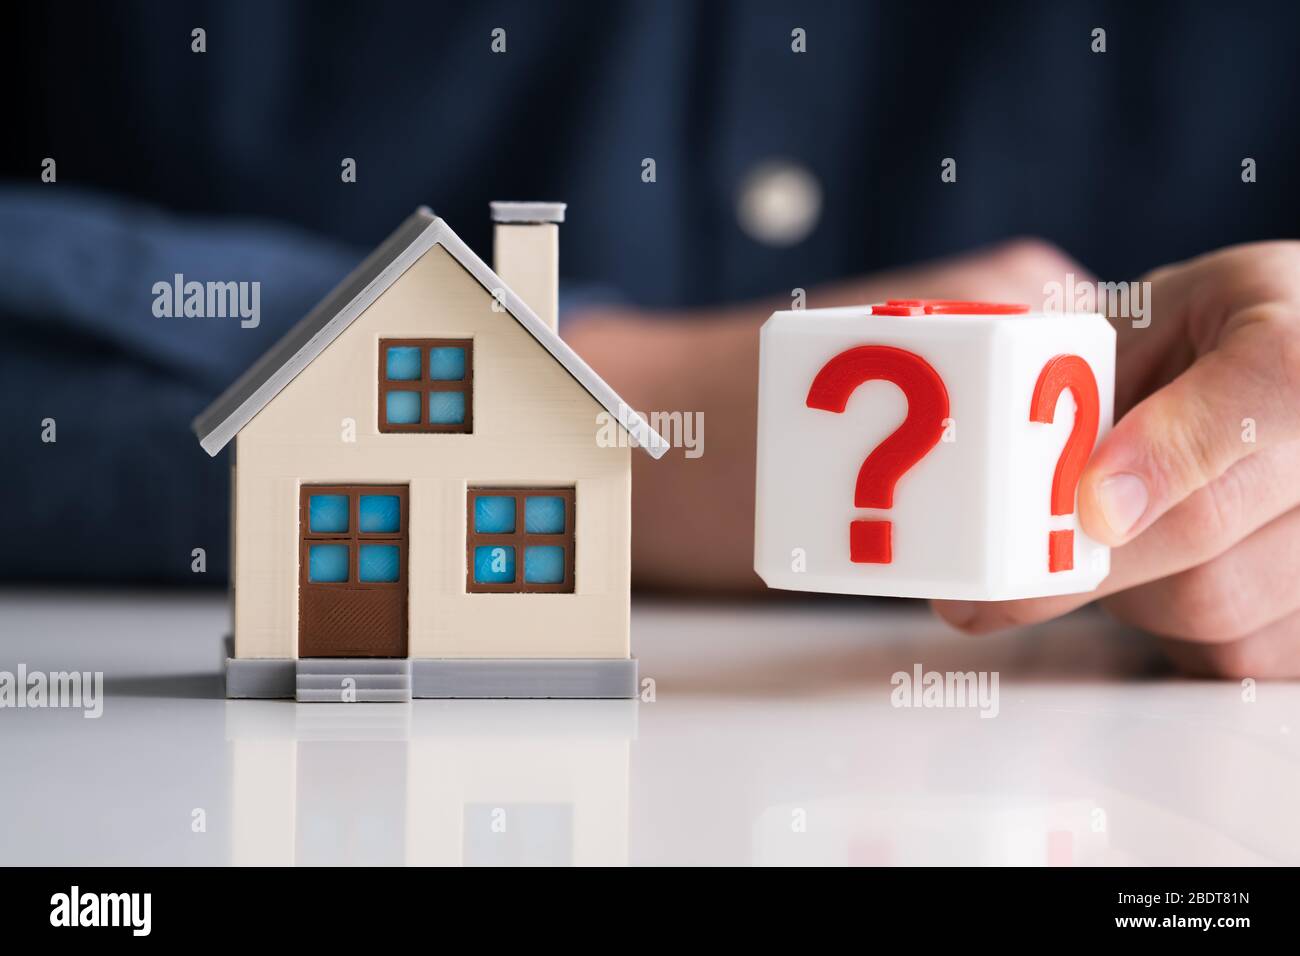 Man Holding Question Mark Cube Next To House Model Stockfoto